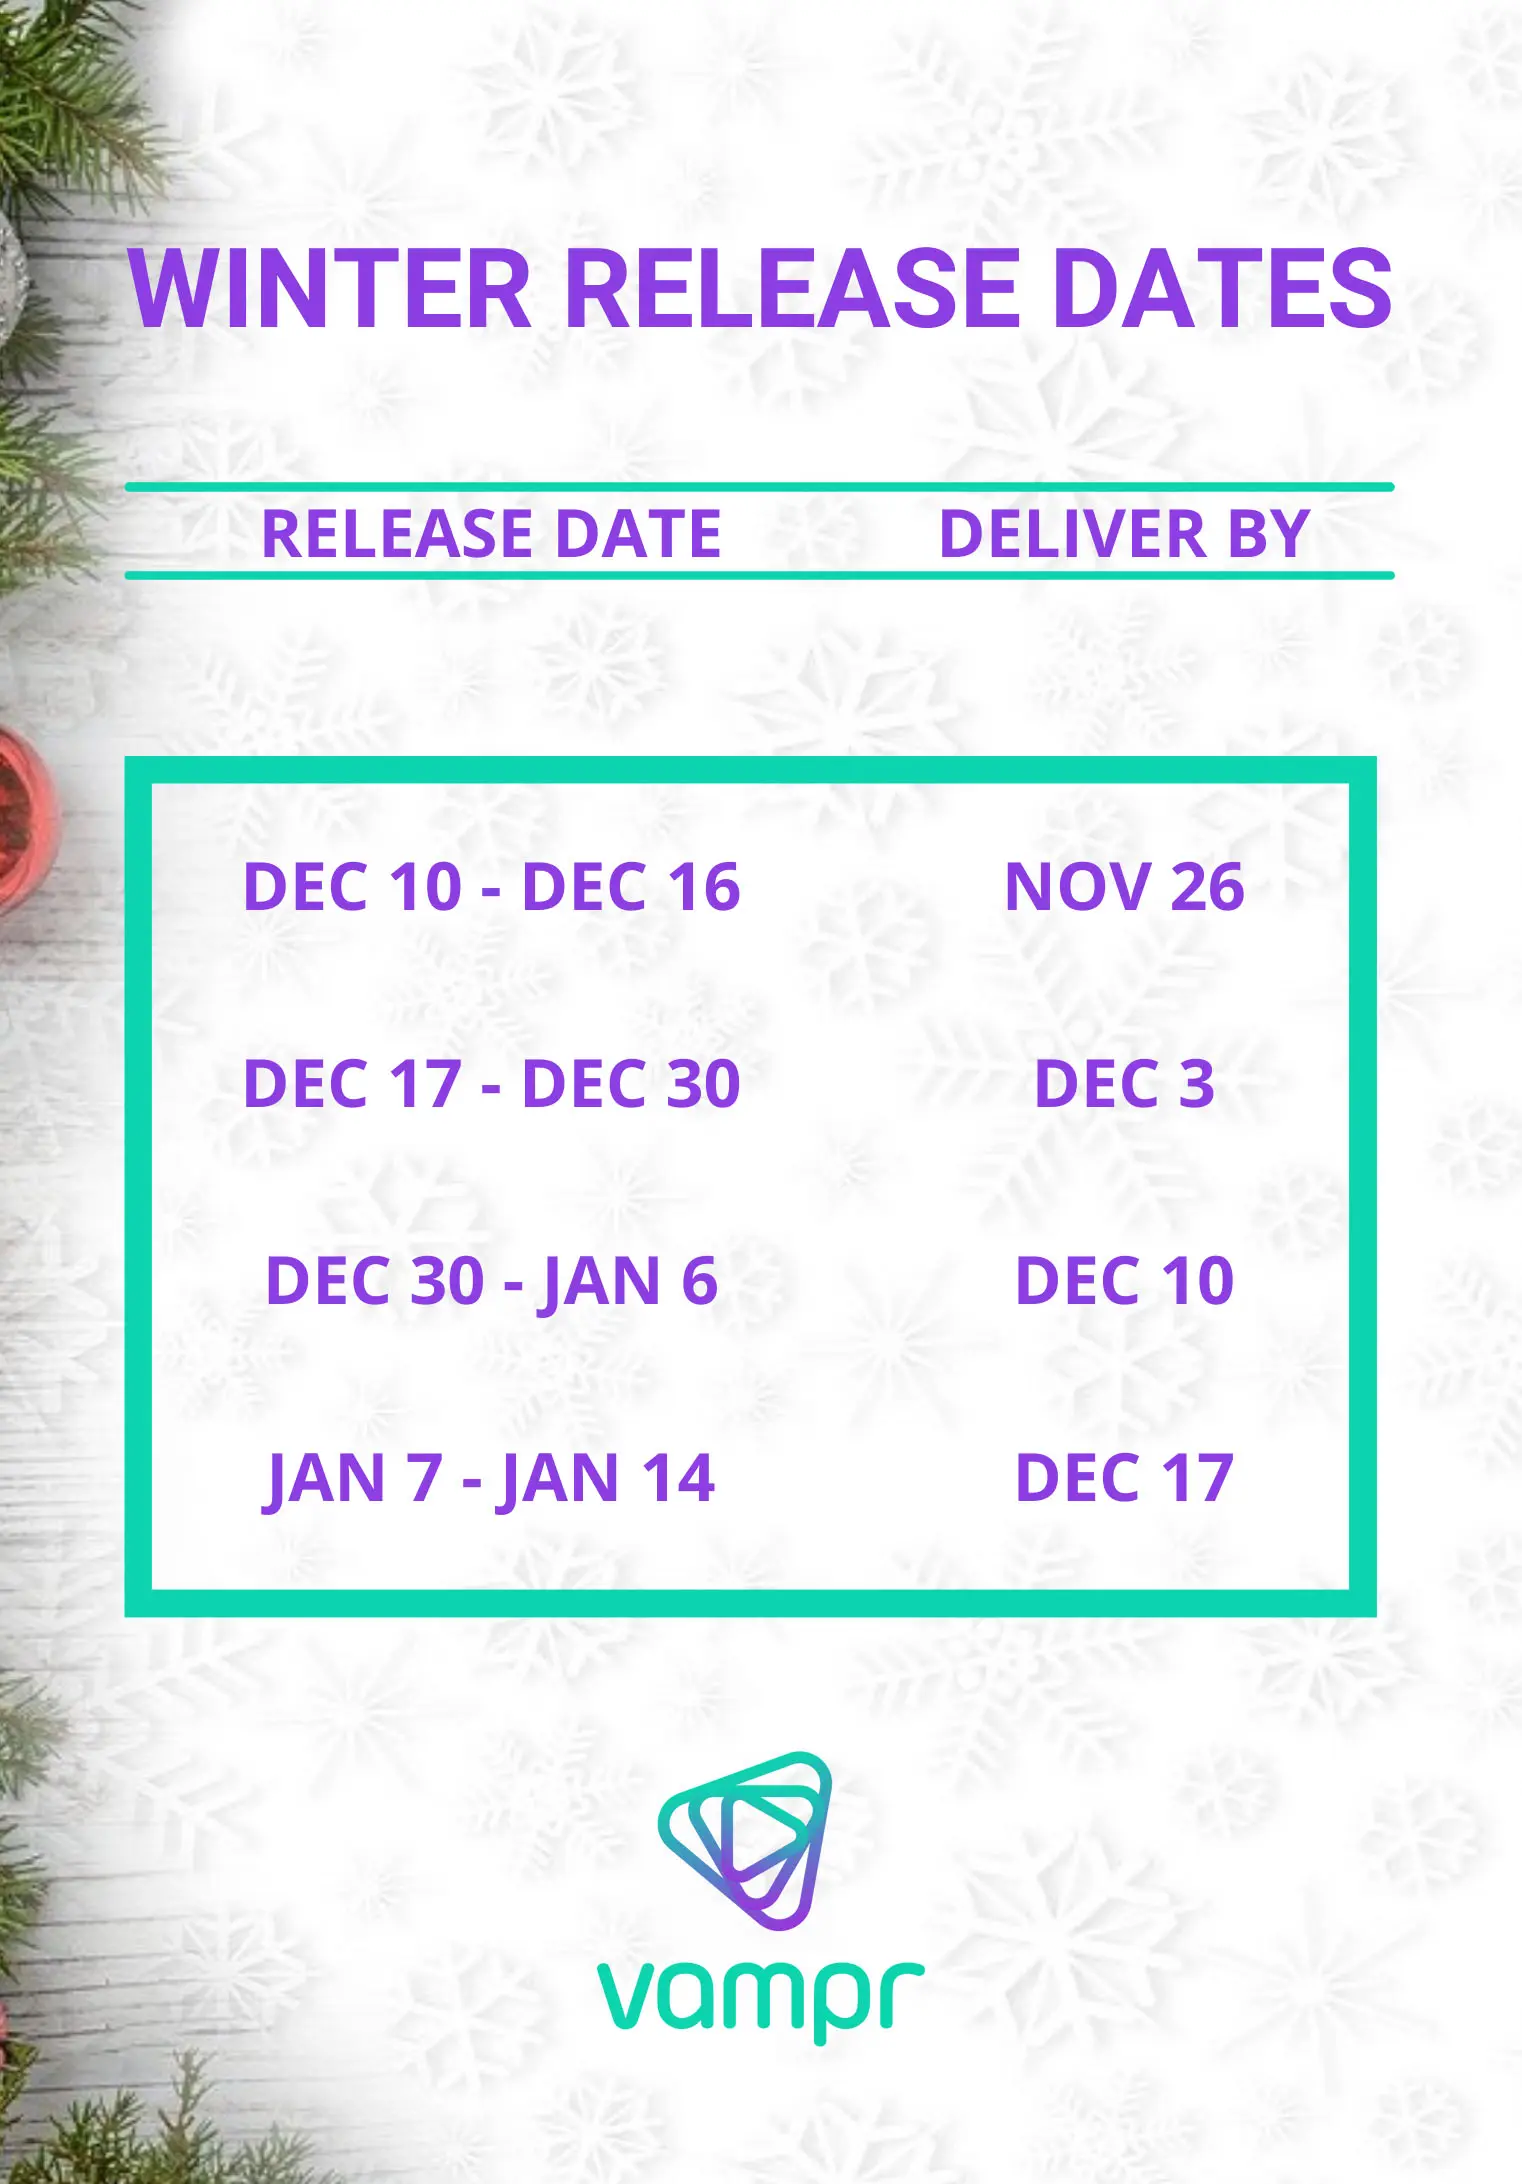 Christmas song release dates